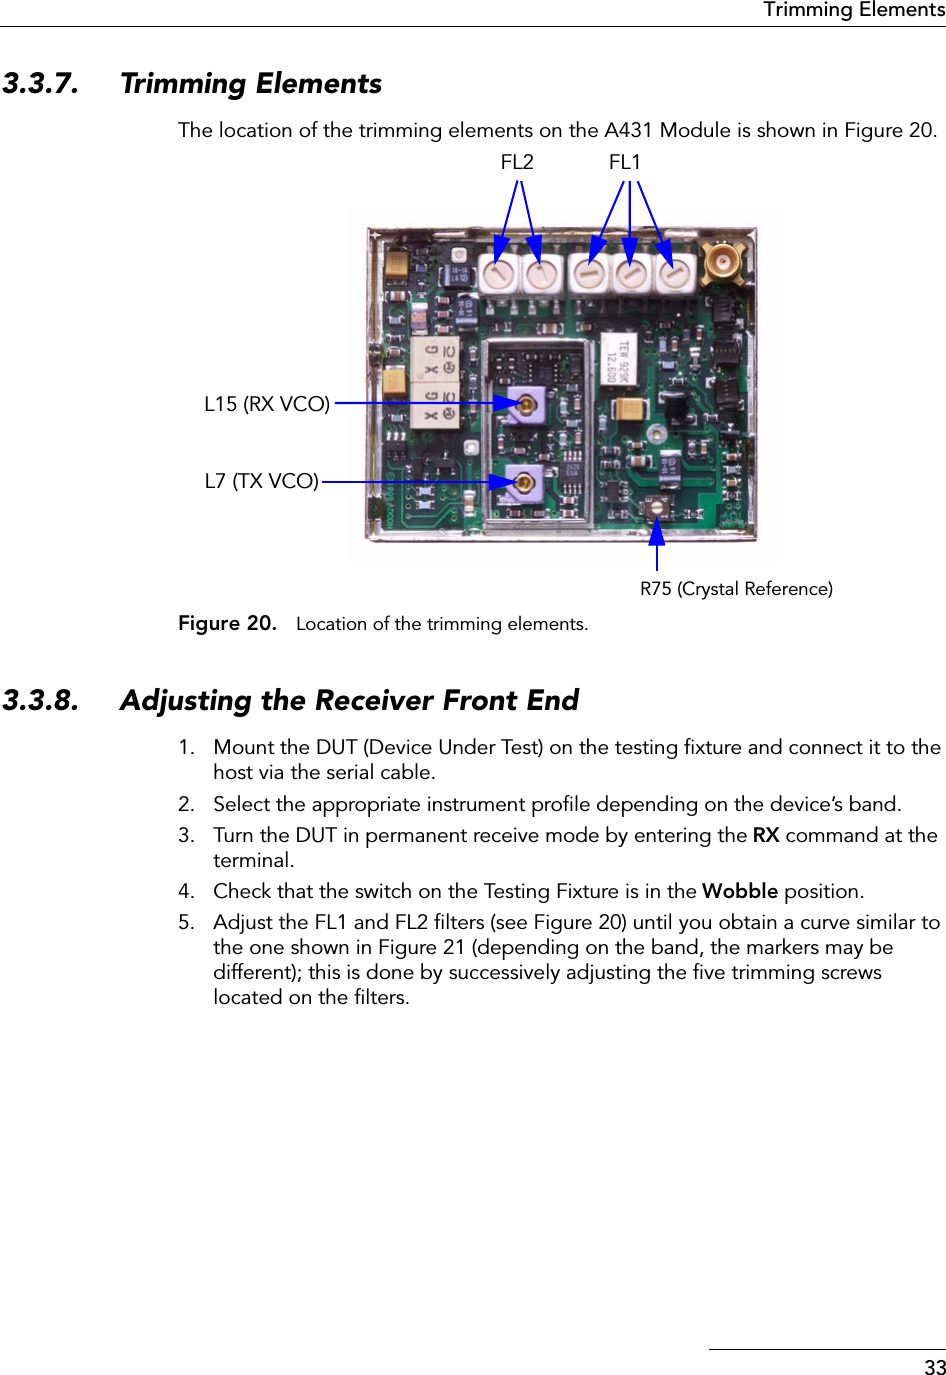 33Trimming Elements3.3.7. Trimming ElementsThe location of the trimming elements on the A431 Module is shown in Figure 20.Figure 20. Location of the trimming elements.3.3.8. Adjusting the Receiver Front End1. Mount the DUT (Device Under Test) on the testing ﬁxture and connect it to the host via the serial cable.2. Select the appropriate instrument proﬁle depending on the device’s band.3. Turn the DUT in permanent receive mode by entering the RX command at the terminal.4. Check that the switch on the Testing Fixture is in the Wobble position.5. Adjust the FL1 and FL2 ﬁlters (see Figure 20) until you obtain a curve similar to the one shown in Figure 21 (depending on the band, the markers may be different); this is done by successively adjusting the ﬁve trimming screws located on the ﬁlters.R75 (Crystal Reference)FL1FL2L15 (RX VCO)L7 (TX VCO)